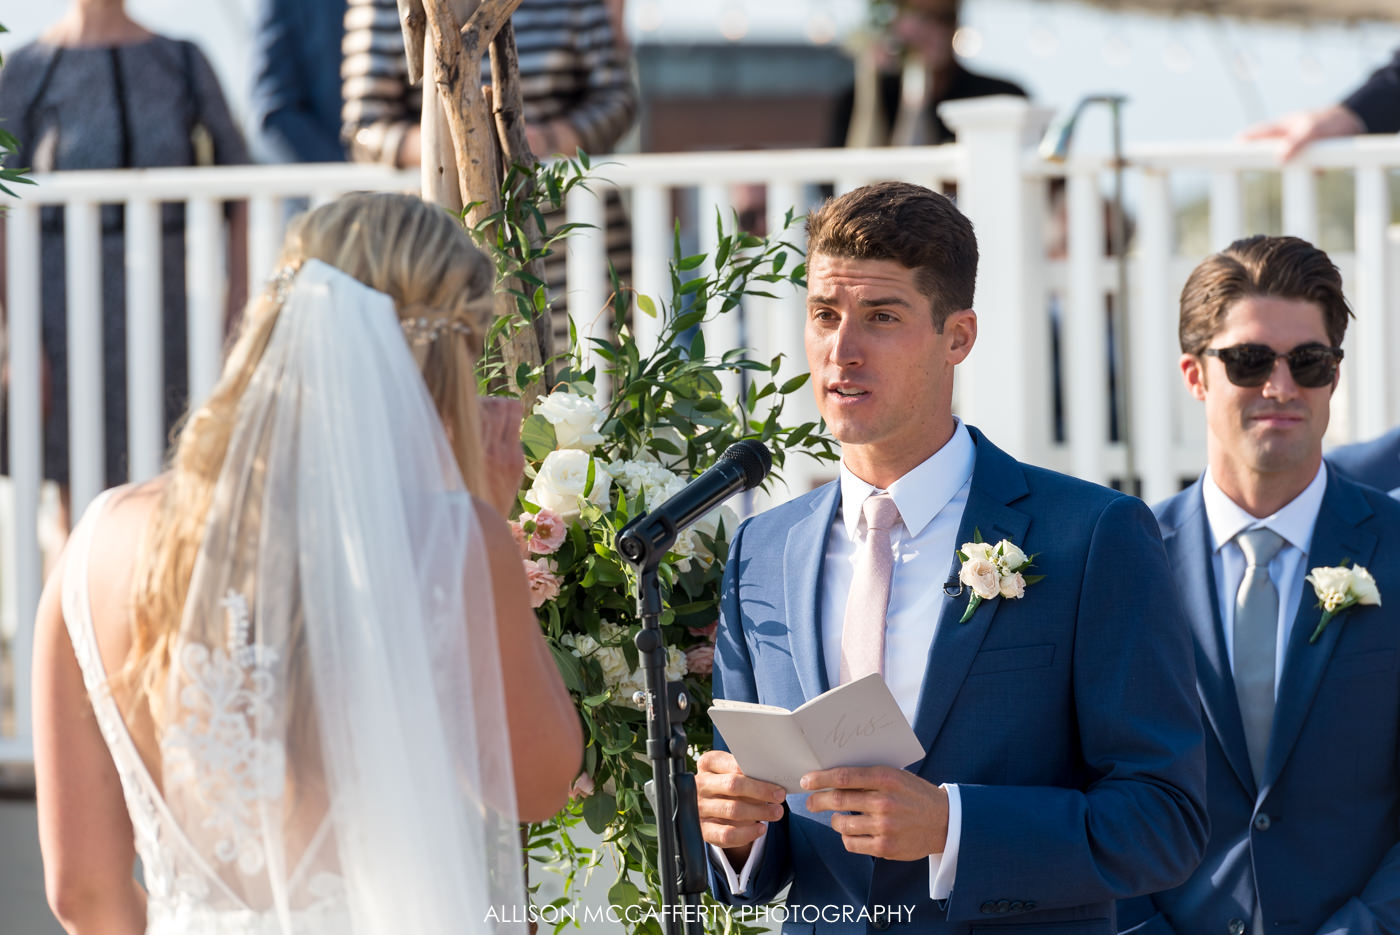 Groom reading his vows during an outdoor ceremony